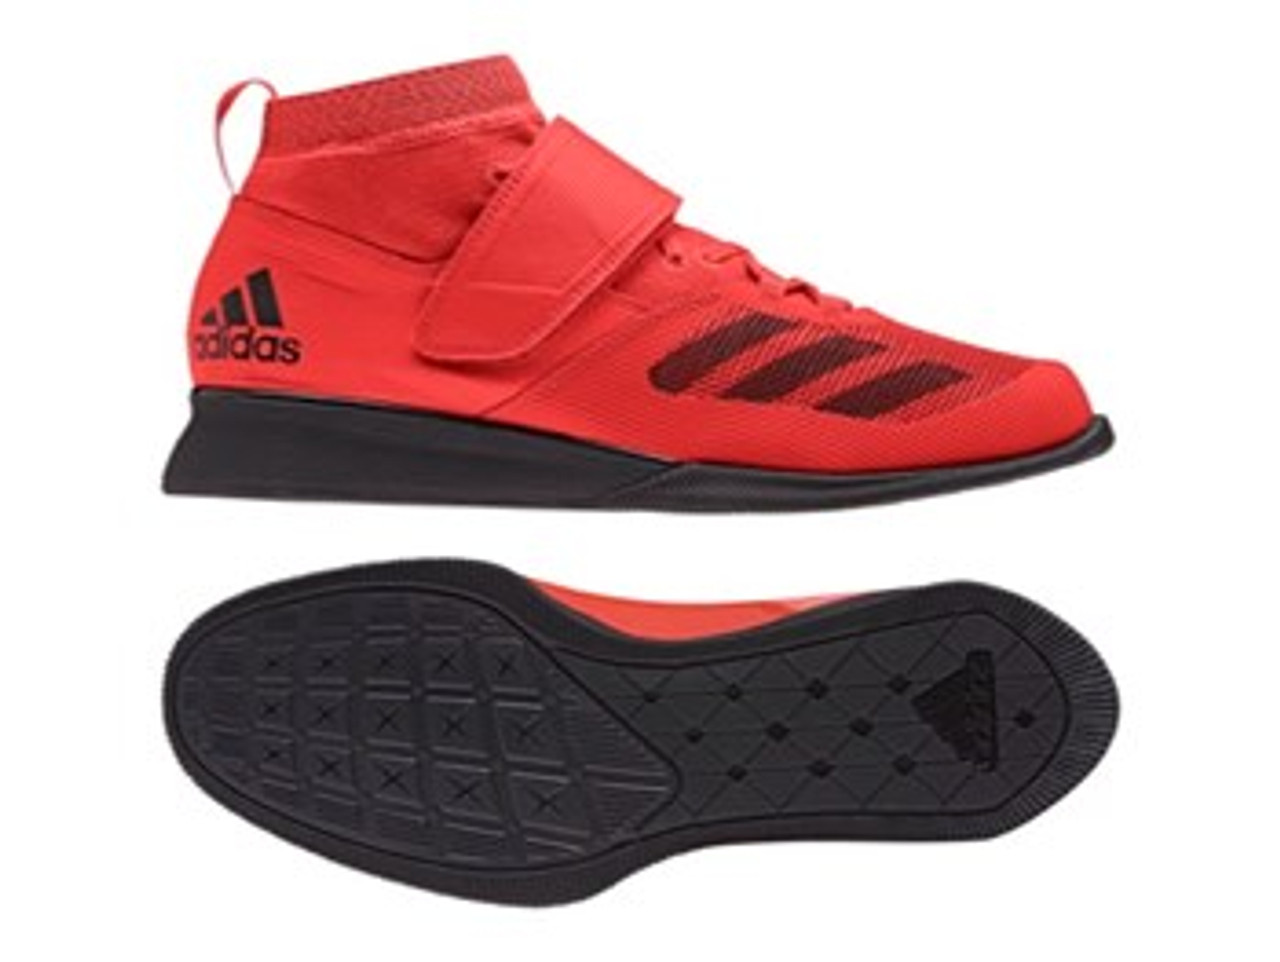 adidas crazy power rk weightlifting shoes